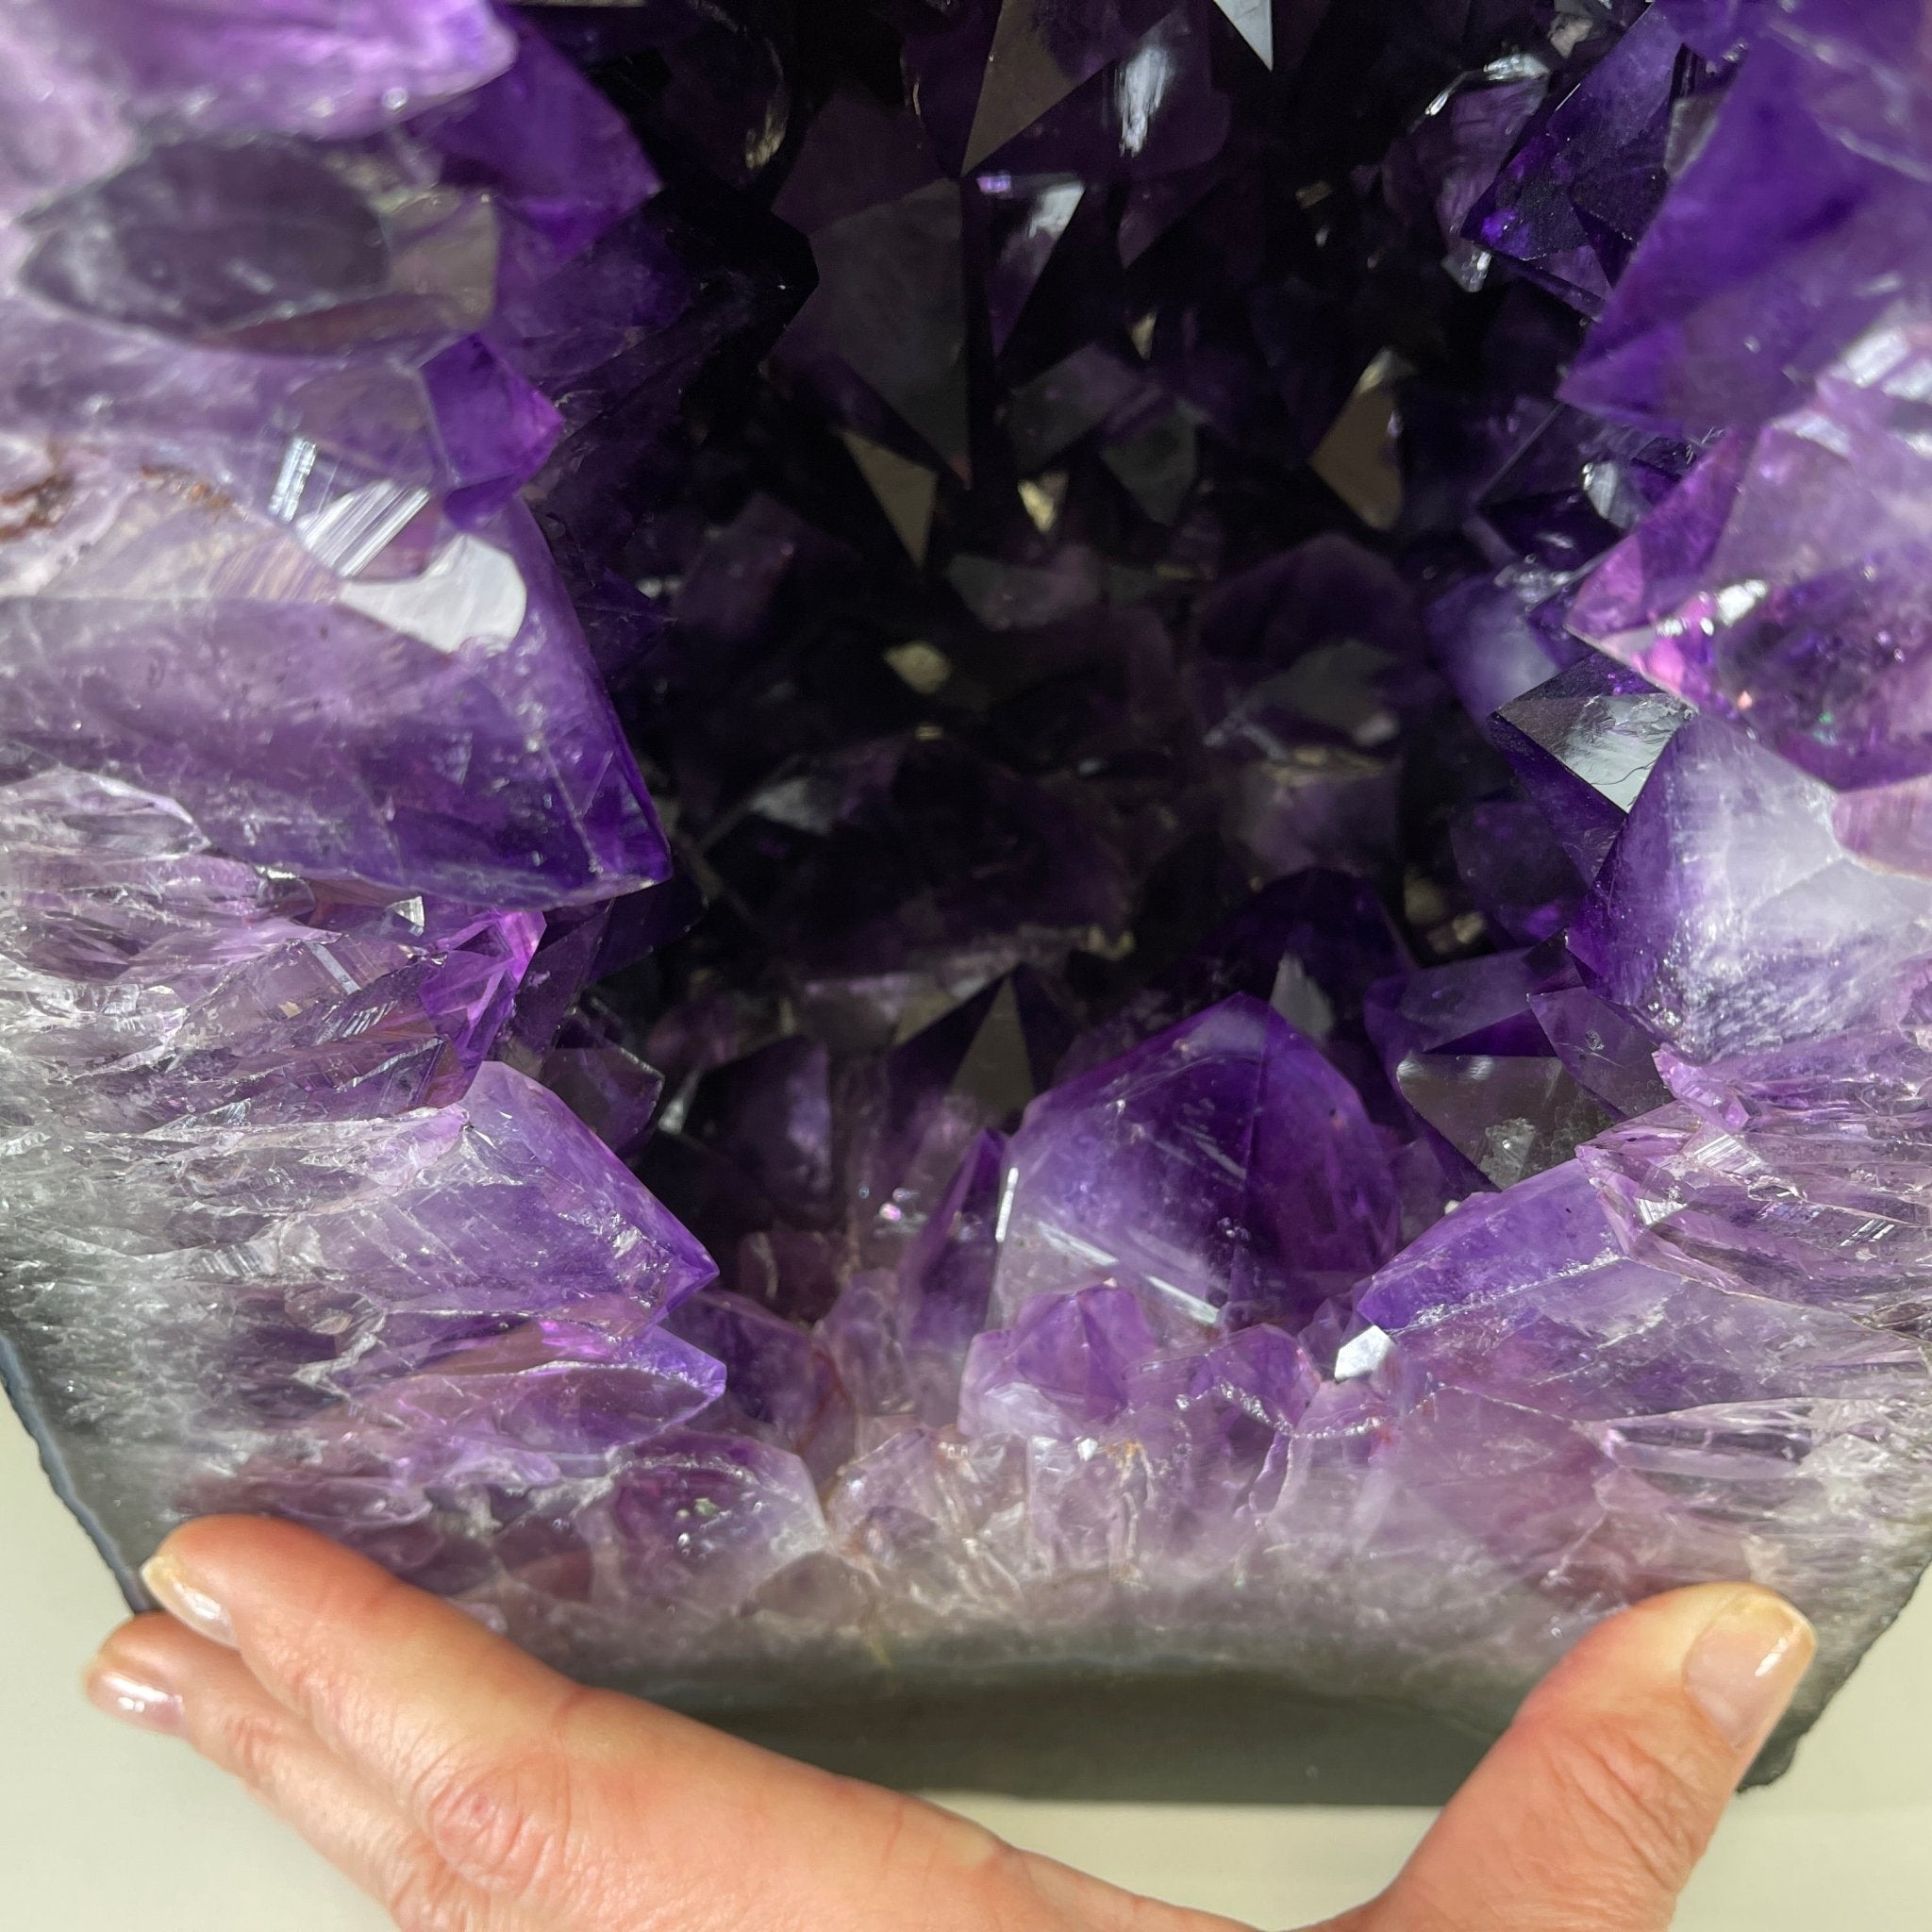 Extra Quality Brazilian Amethyst Cathedral, 19.6” tall & 81.4 lbs #5601-0708 by Brazil Gems - Brazil GemsBrazil GemsExtra Quality Brazilian Amethyst Cathedral, 19.6” tall & 81.4 lbs #5601-0708 by Brazil GemsCathedrals5601-0708